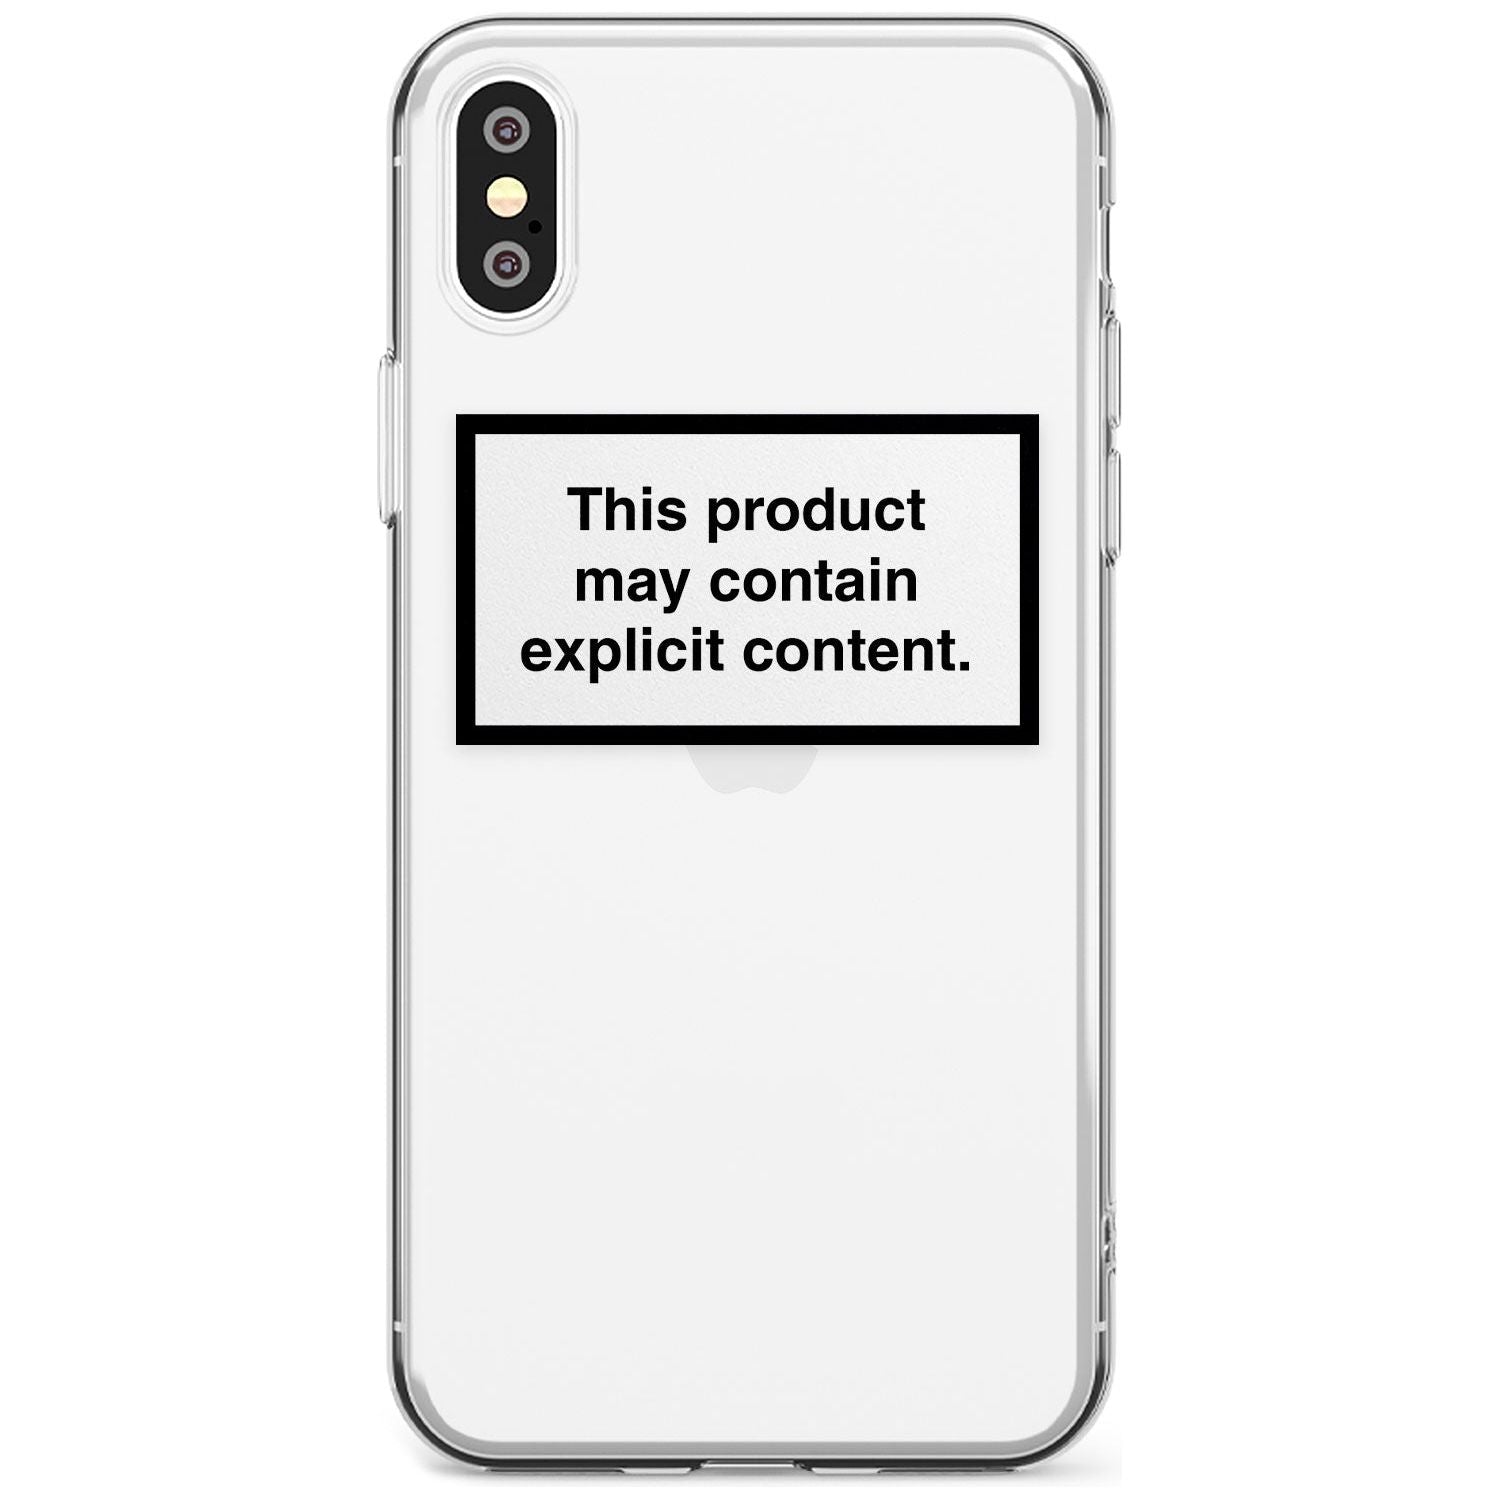 This product may contain explicit content Black Impact Phone Case for iPhone X XS Max XR